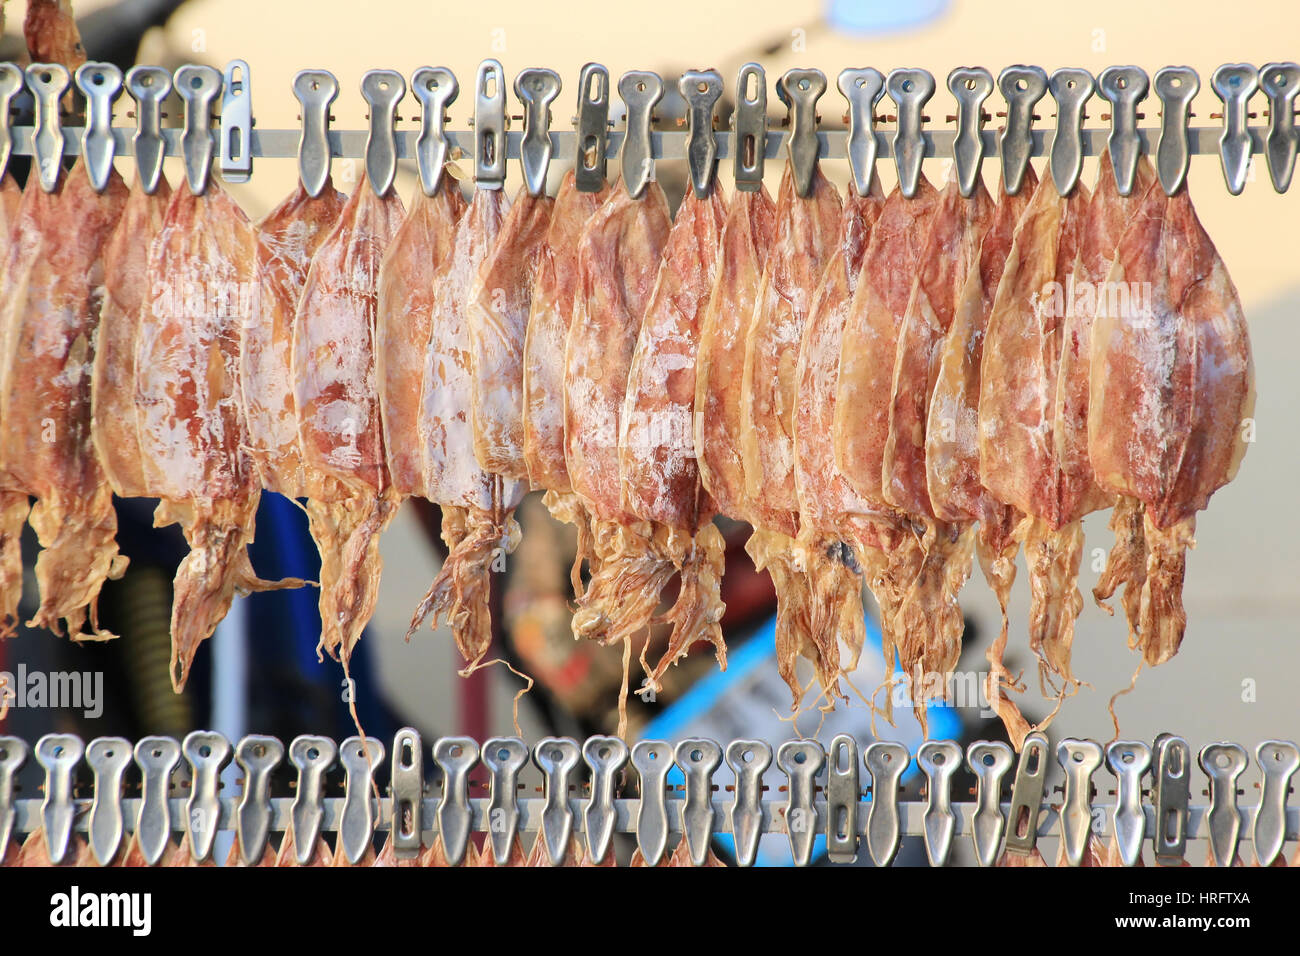 Thai Dried Salted Cuttlefish in the Food Market in Thailand Stock Photo